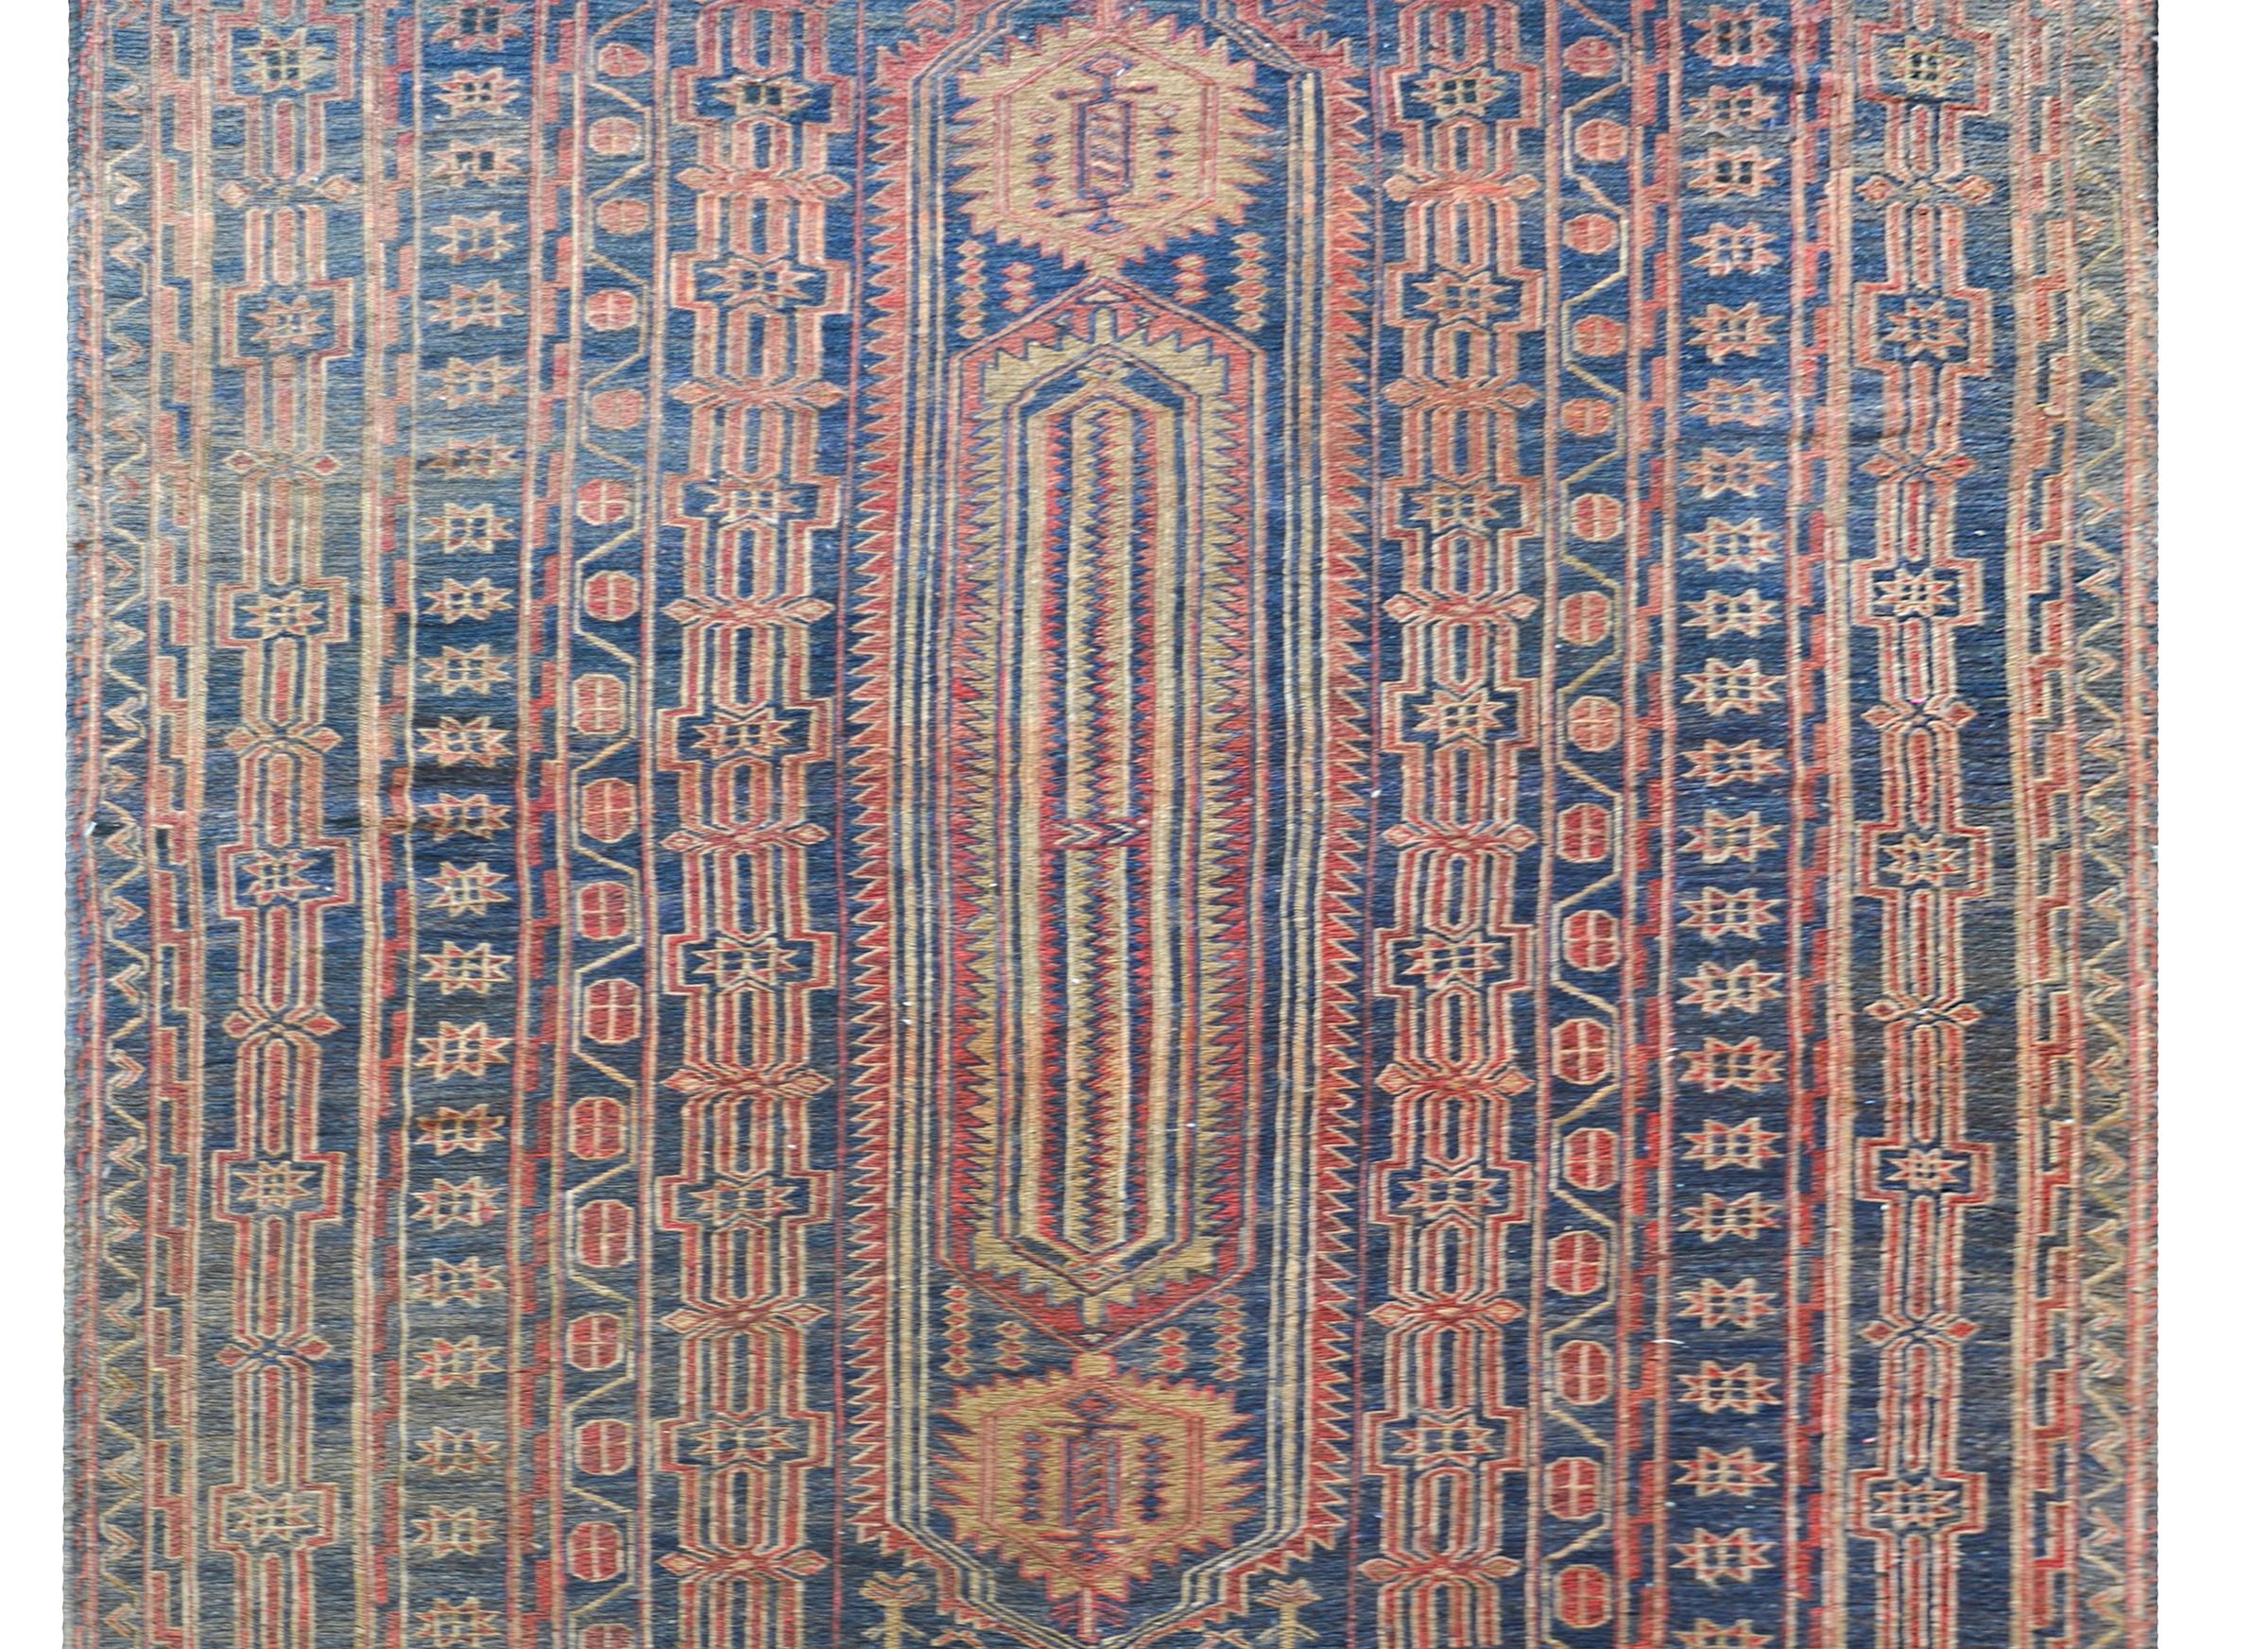 An incredible late 20th century Afghani Bashir flatweave rug with tribal pattern woven with stylized flowers and vines woven in crimson, indigo, and undyed wool.